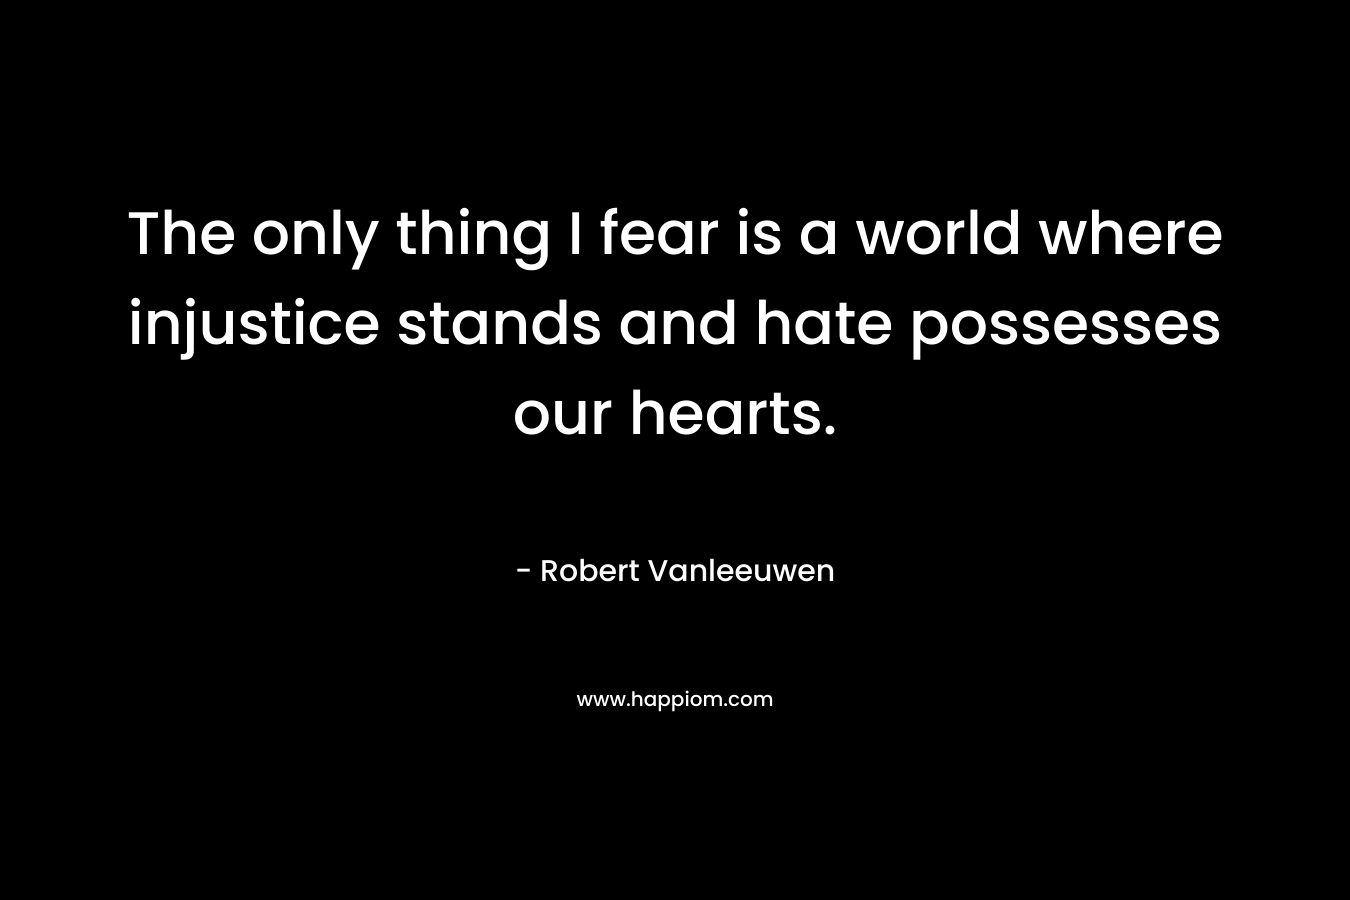 The only thing I fear is a world where injustice stands and hate possesses our hearts. – Robert Vanleeuwen